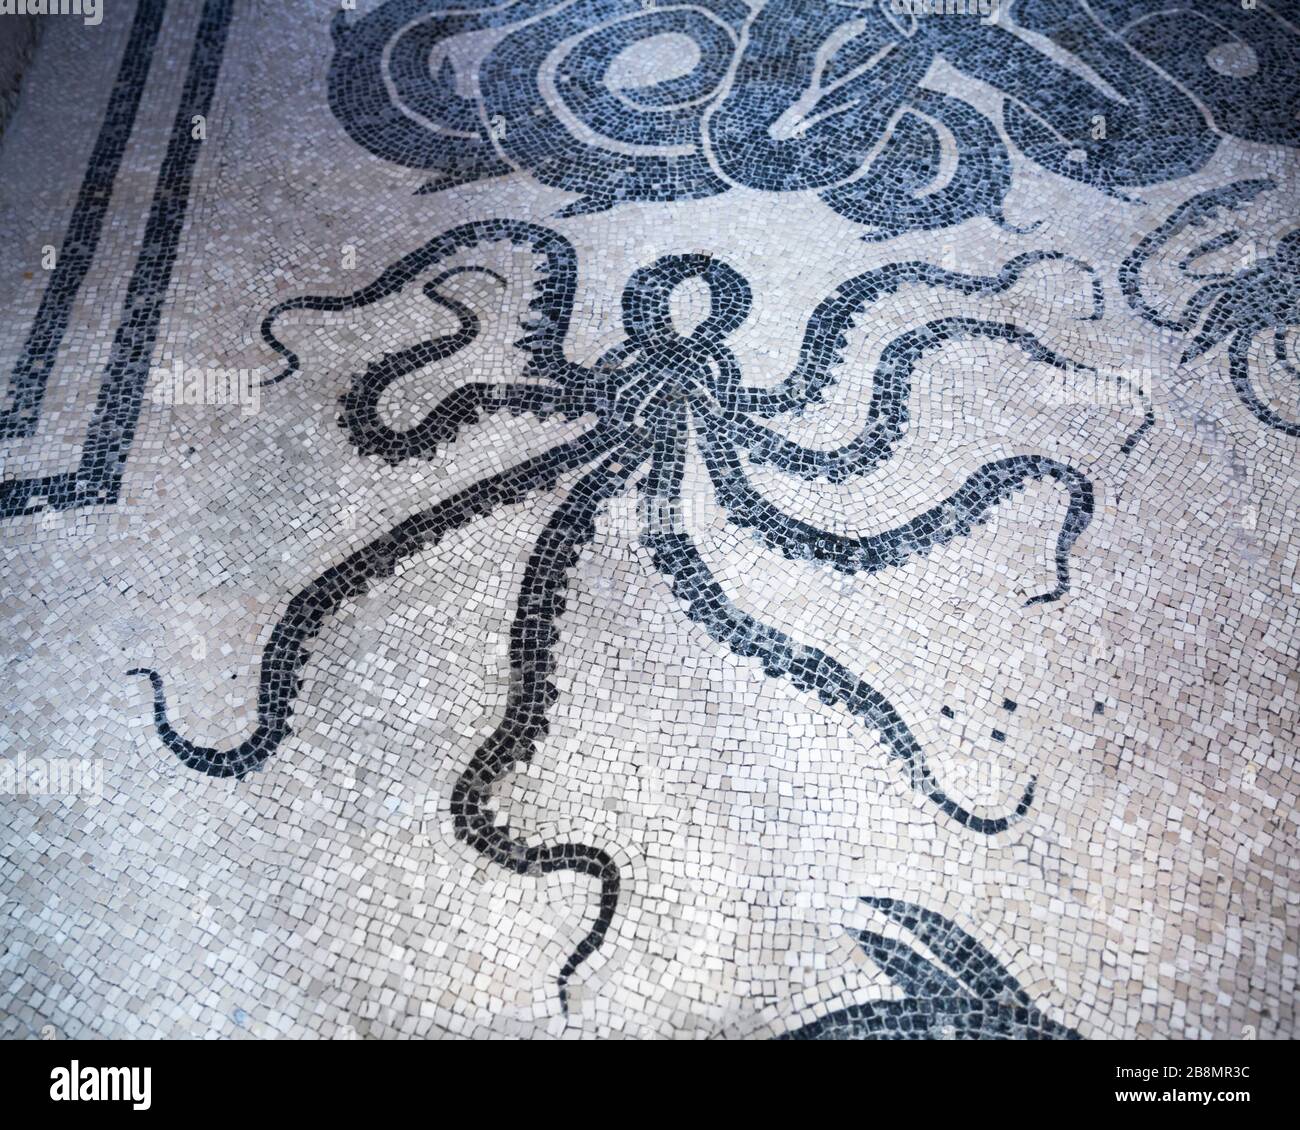 Ancient Roman mosaic floor in Herculaneum  depicting a stylize octopus, Campania, Italy. Stock Photo